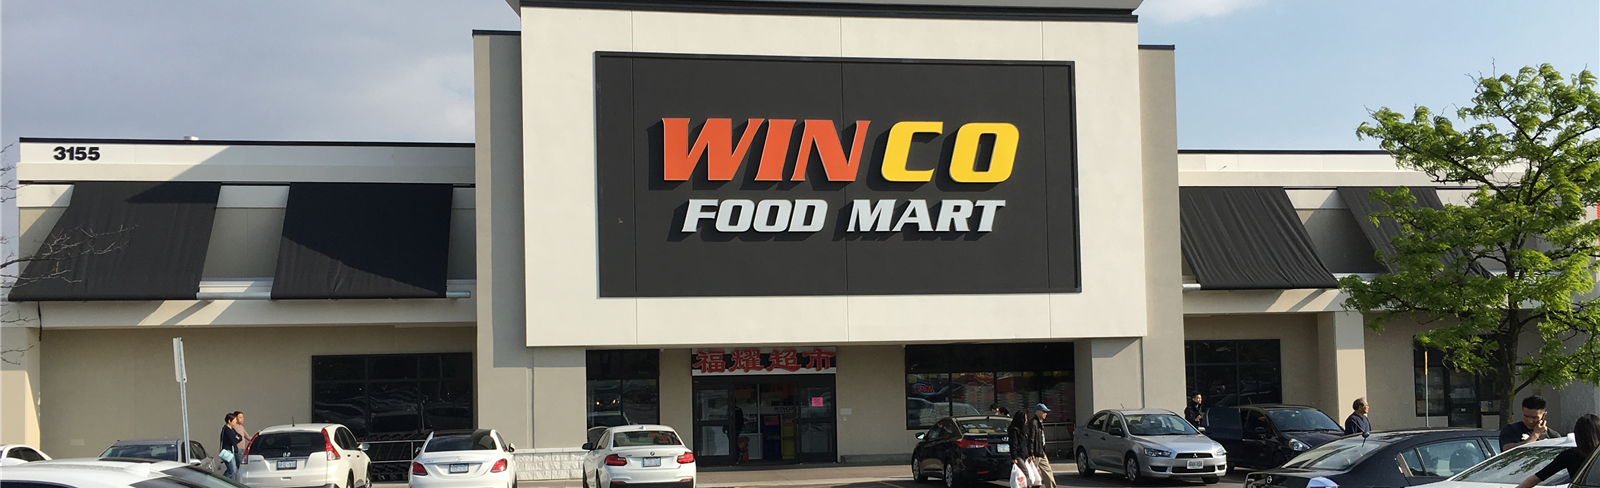 Winco Food Mart - Grocery Store